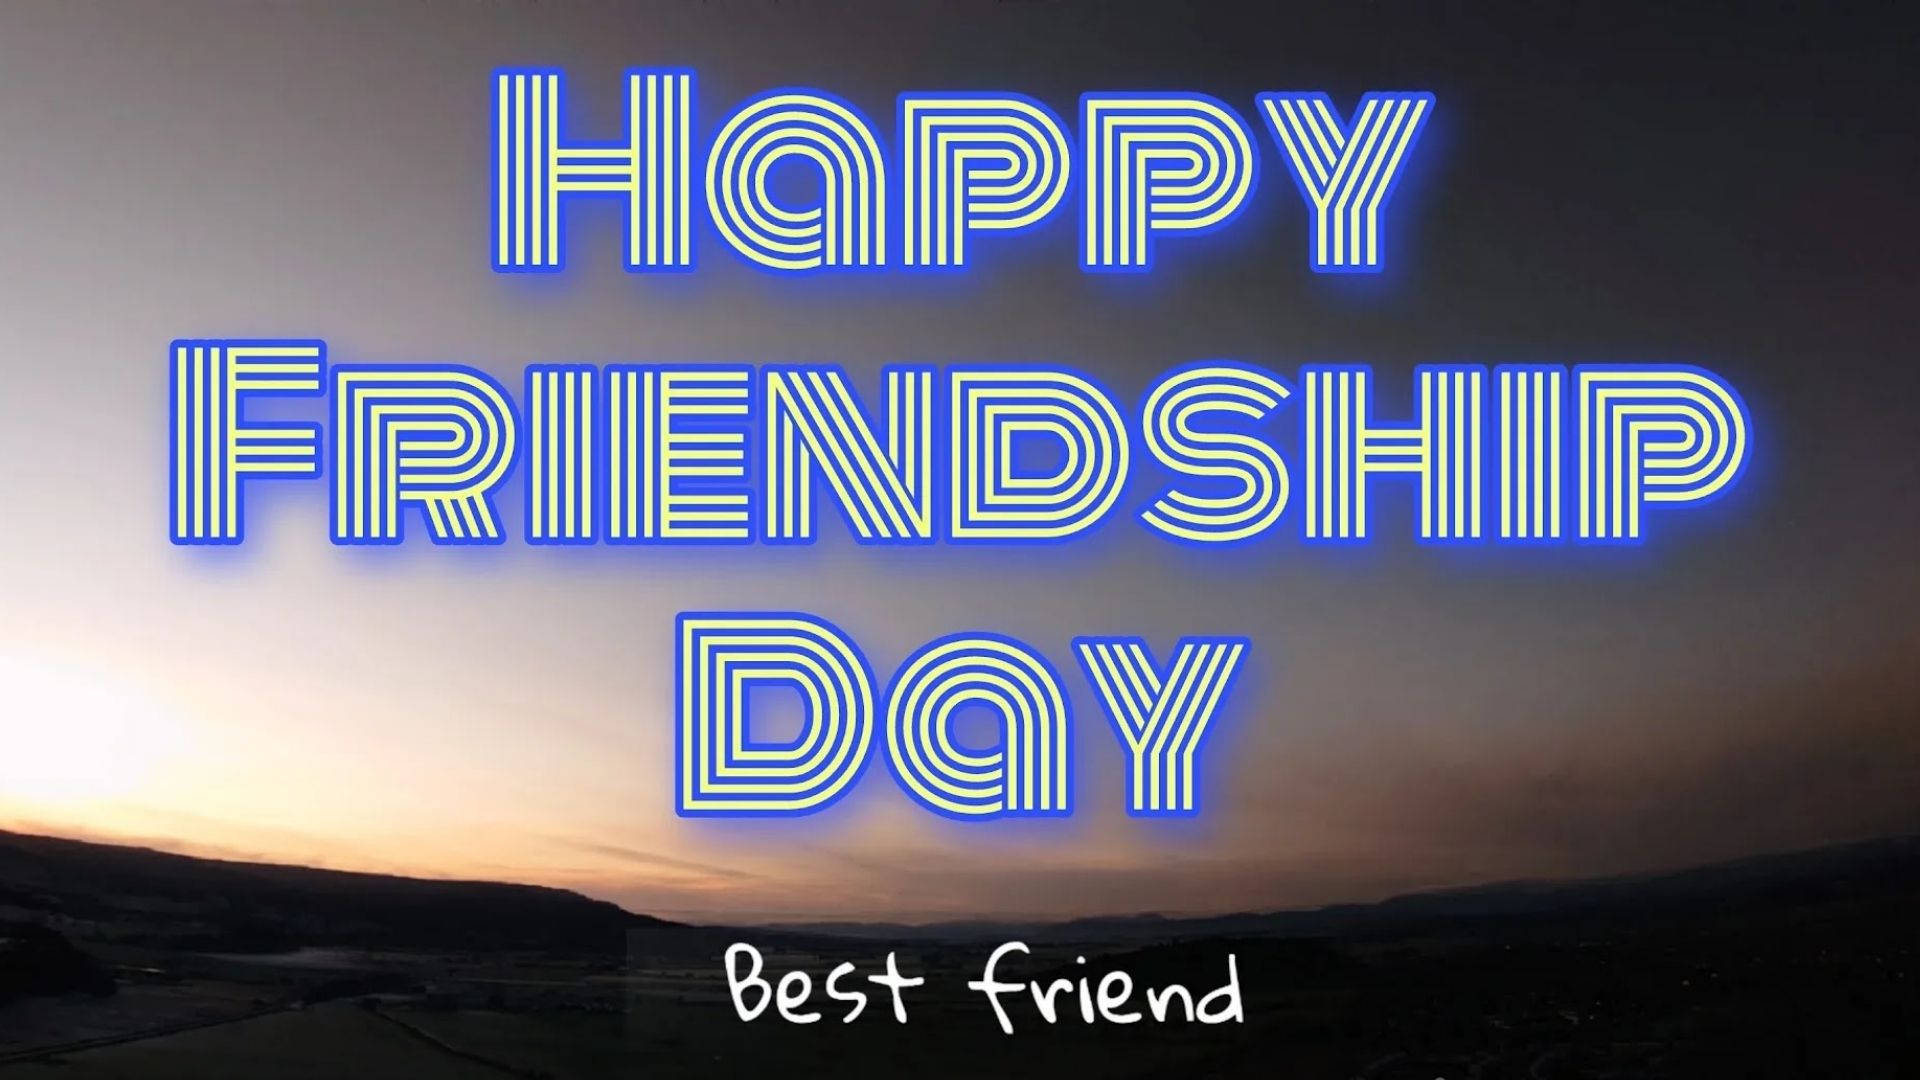 Friendship Day Greeting In The Sky Background